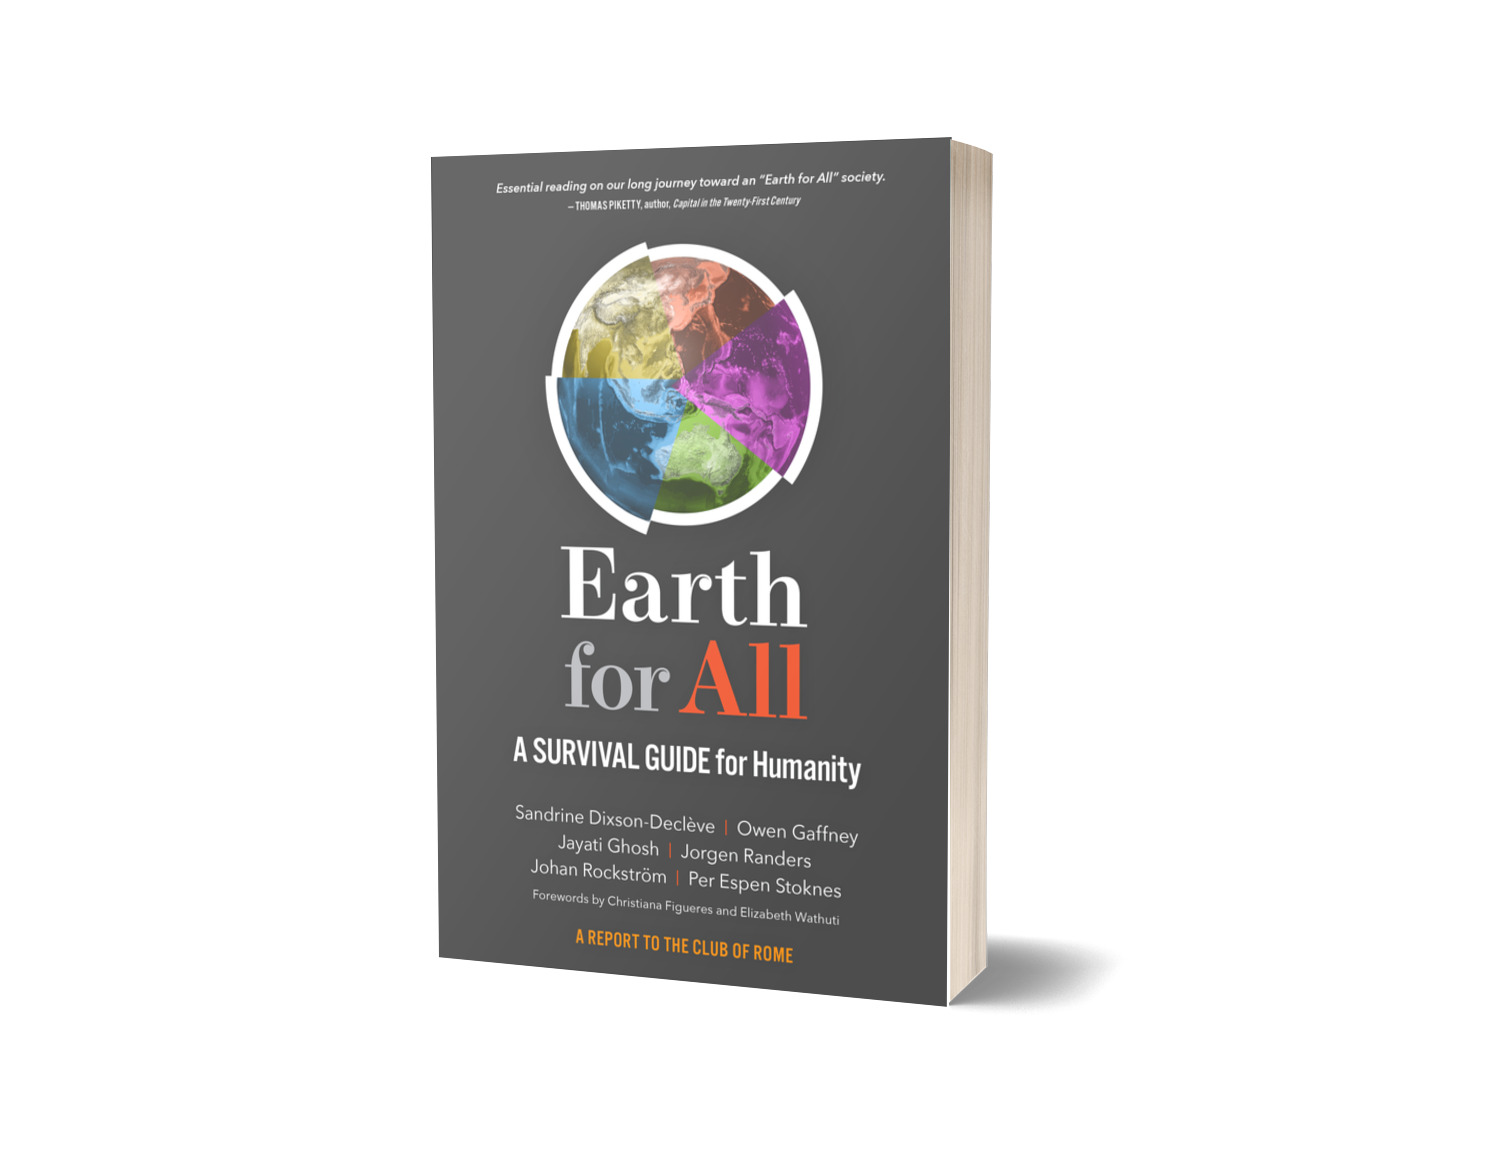 Earth for All – A Survival Guide for Humanity